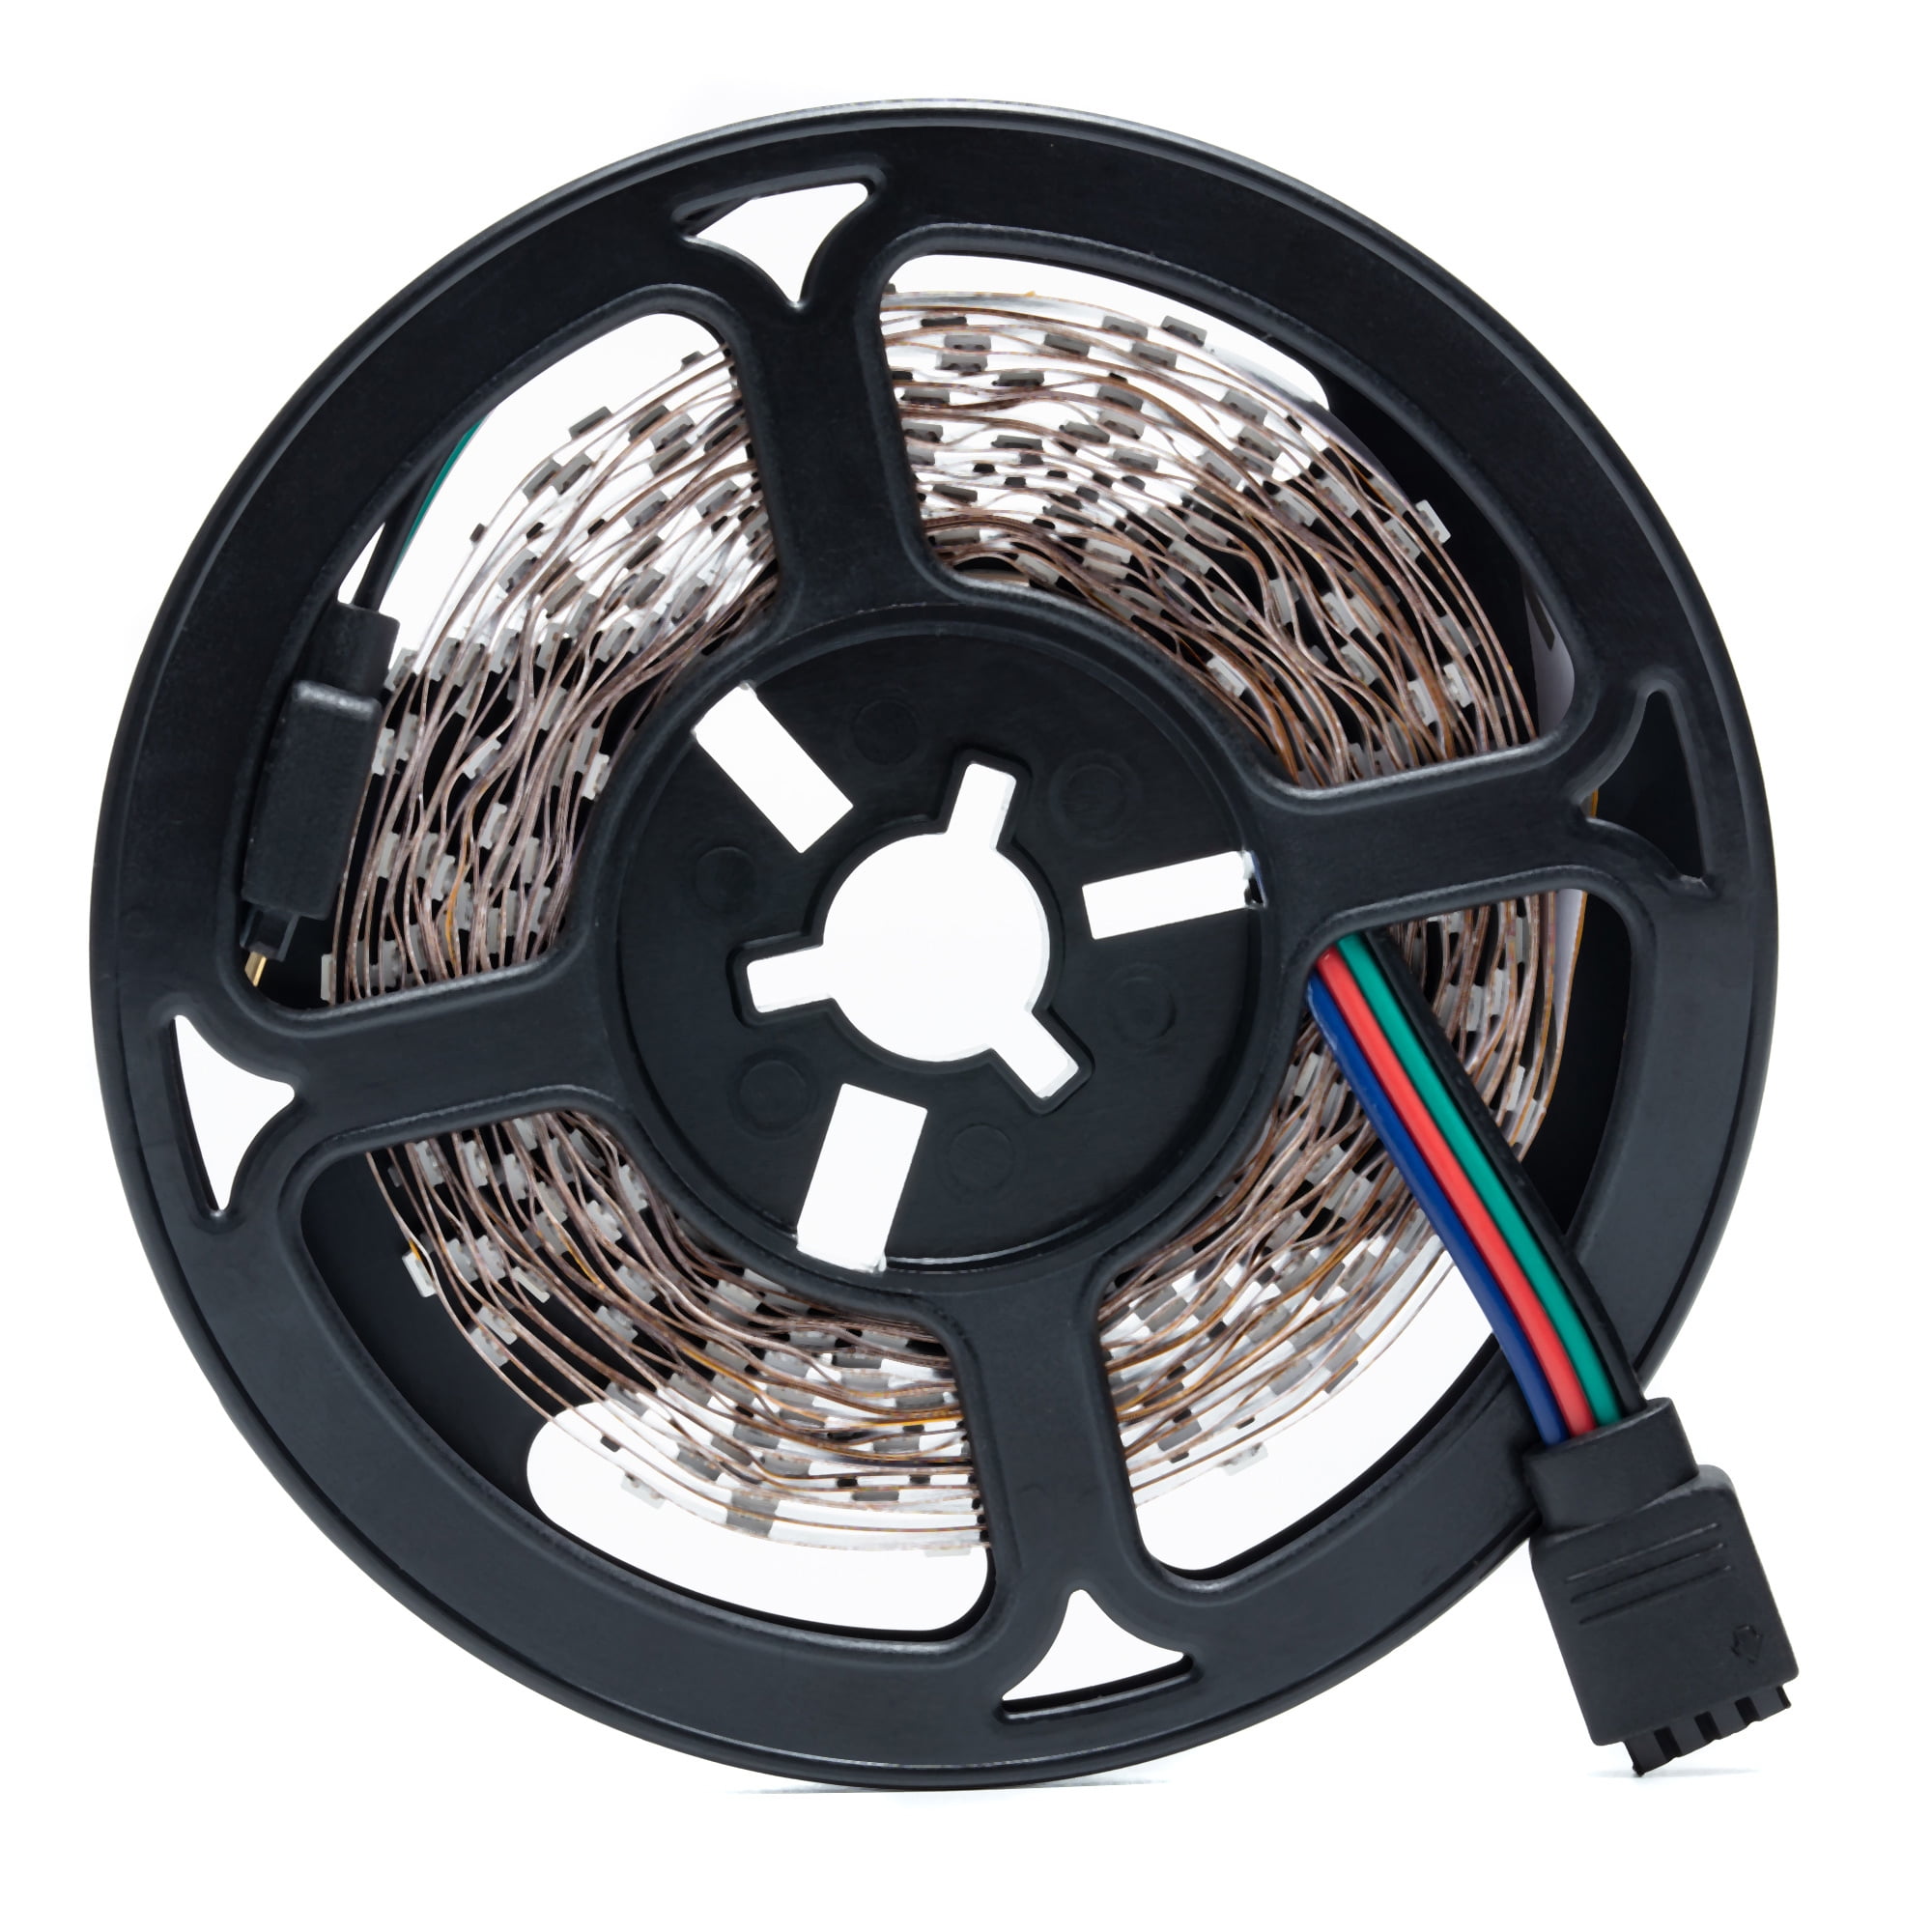 Details about   32.8FT Flexible RGB LED SMD Strip Light Fairy Lights 44 Key Remote Waterproof ！